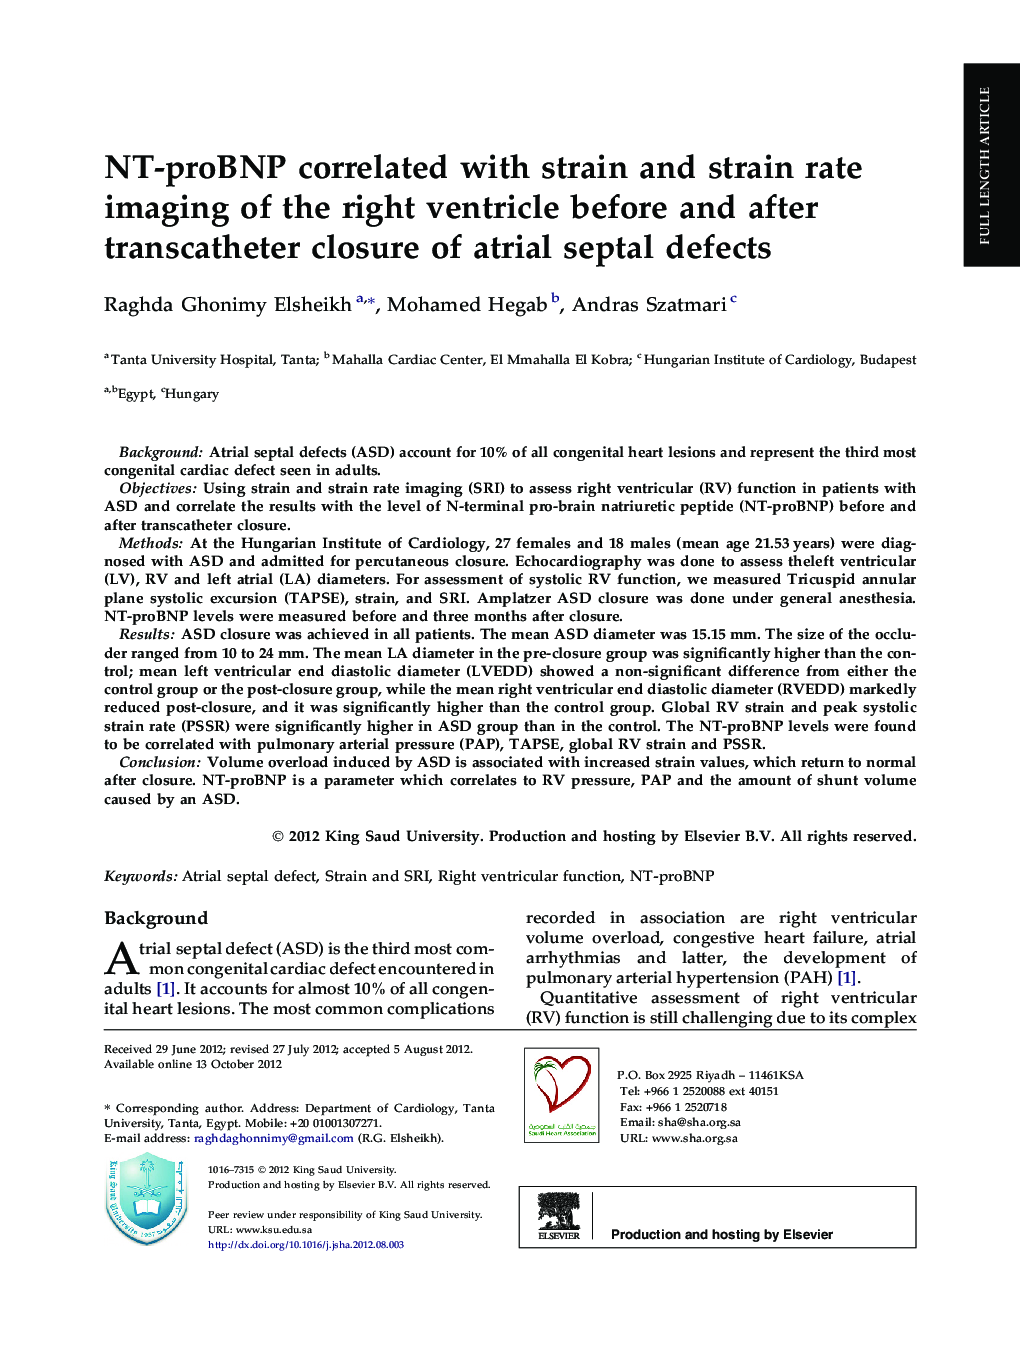 NT-proBNP correlated with strain and strain rate imaging of the right ventricle before and after transcatheter closure of atrial septal defects 